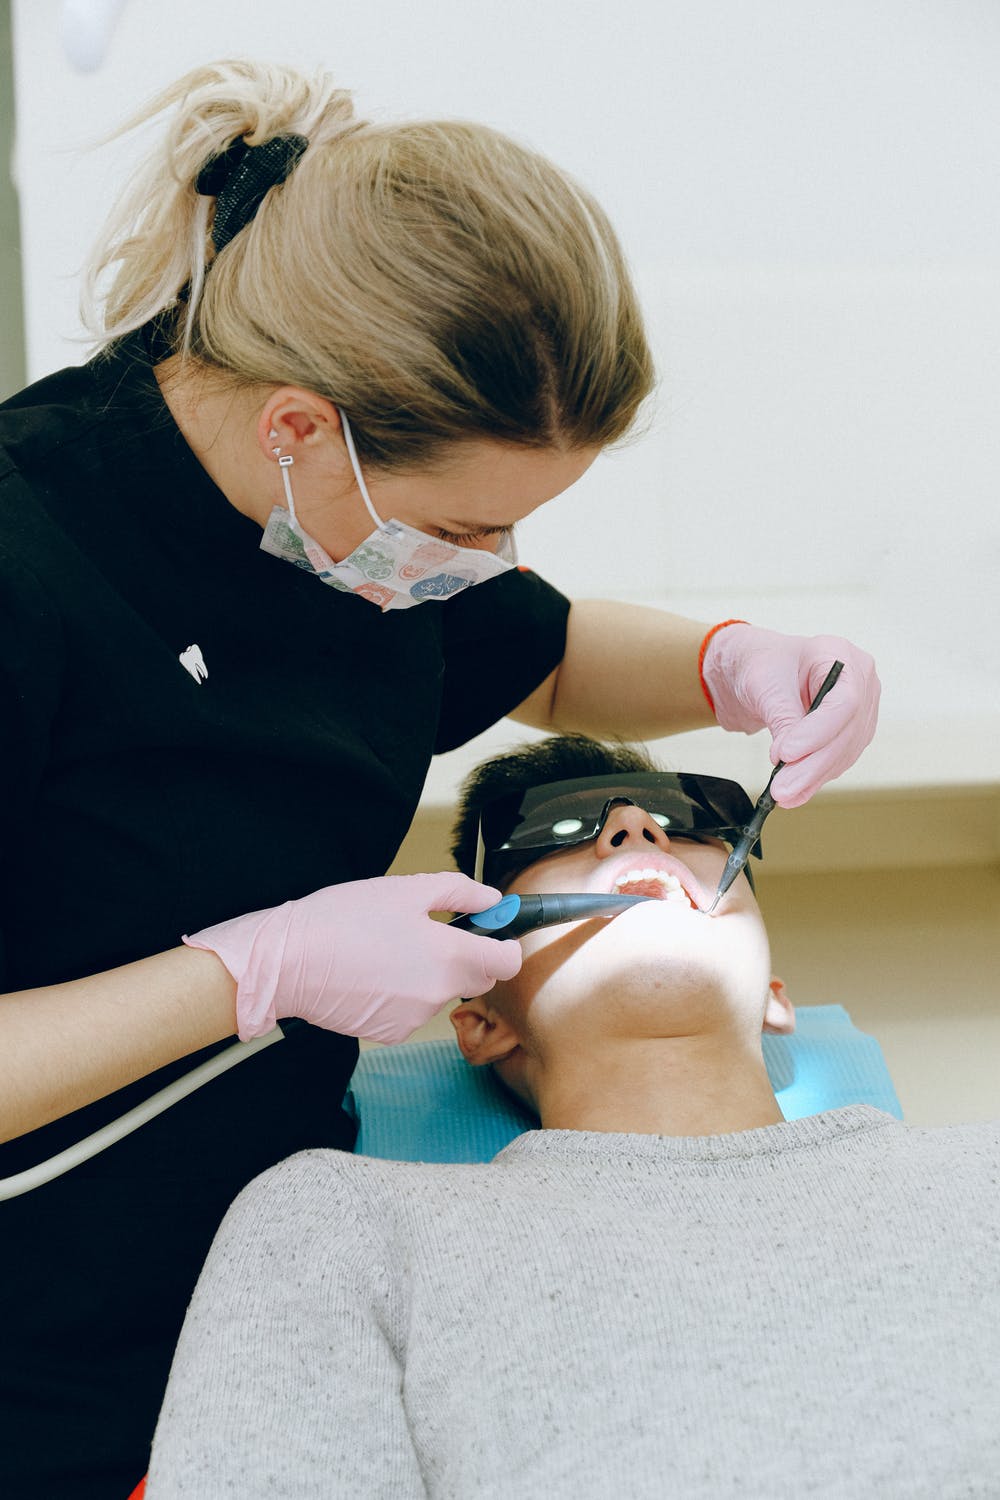 What Is Considered Basic Care for Dental